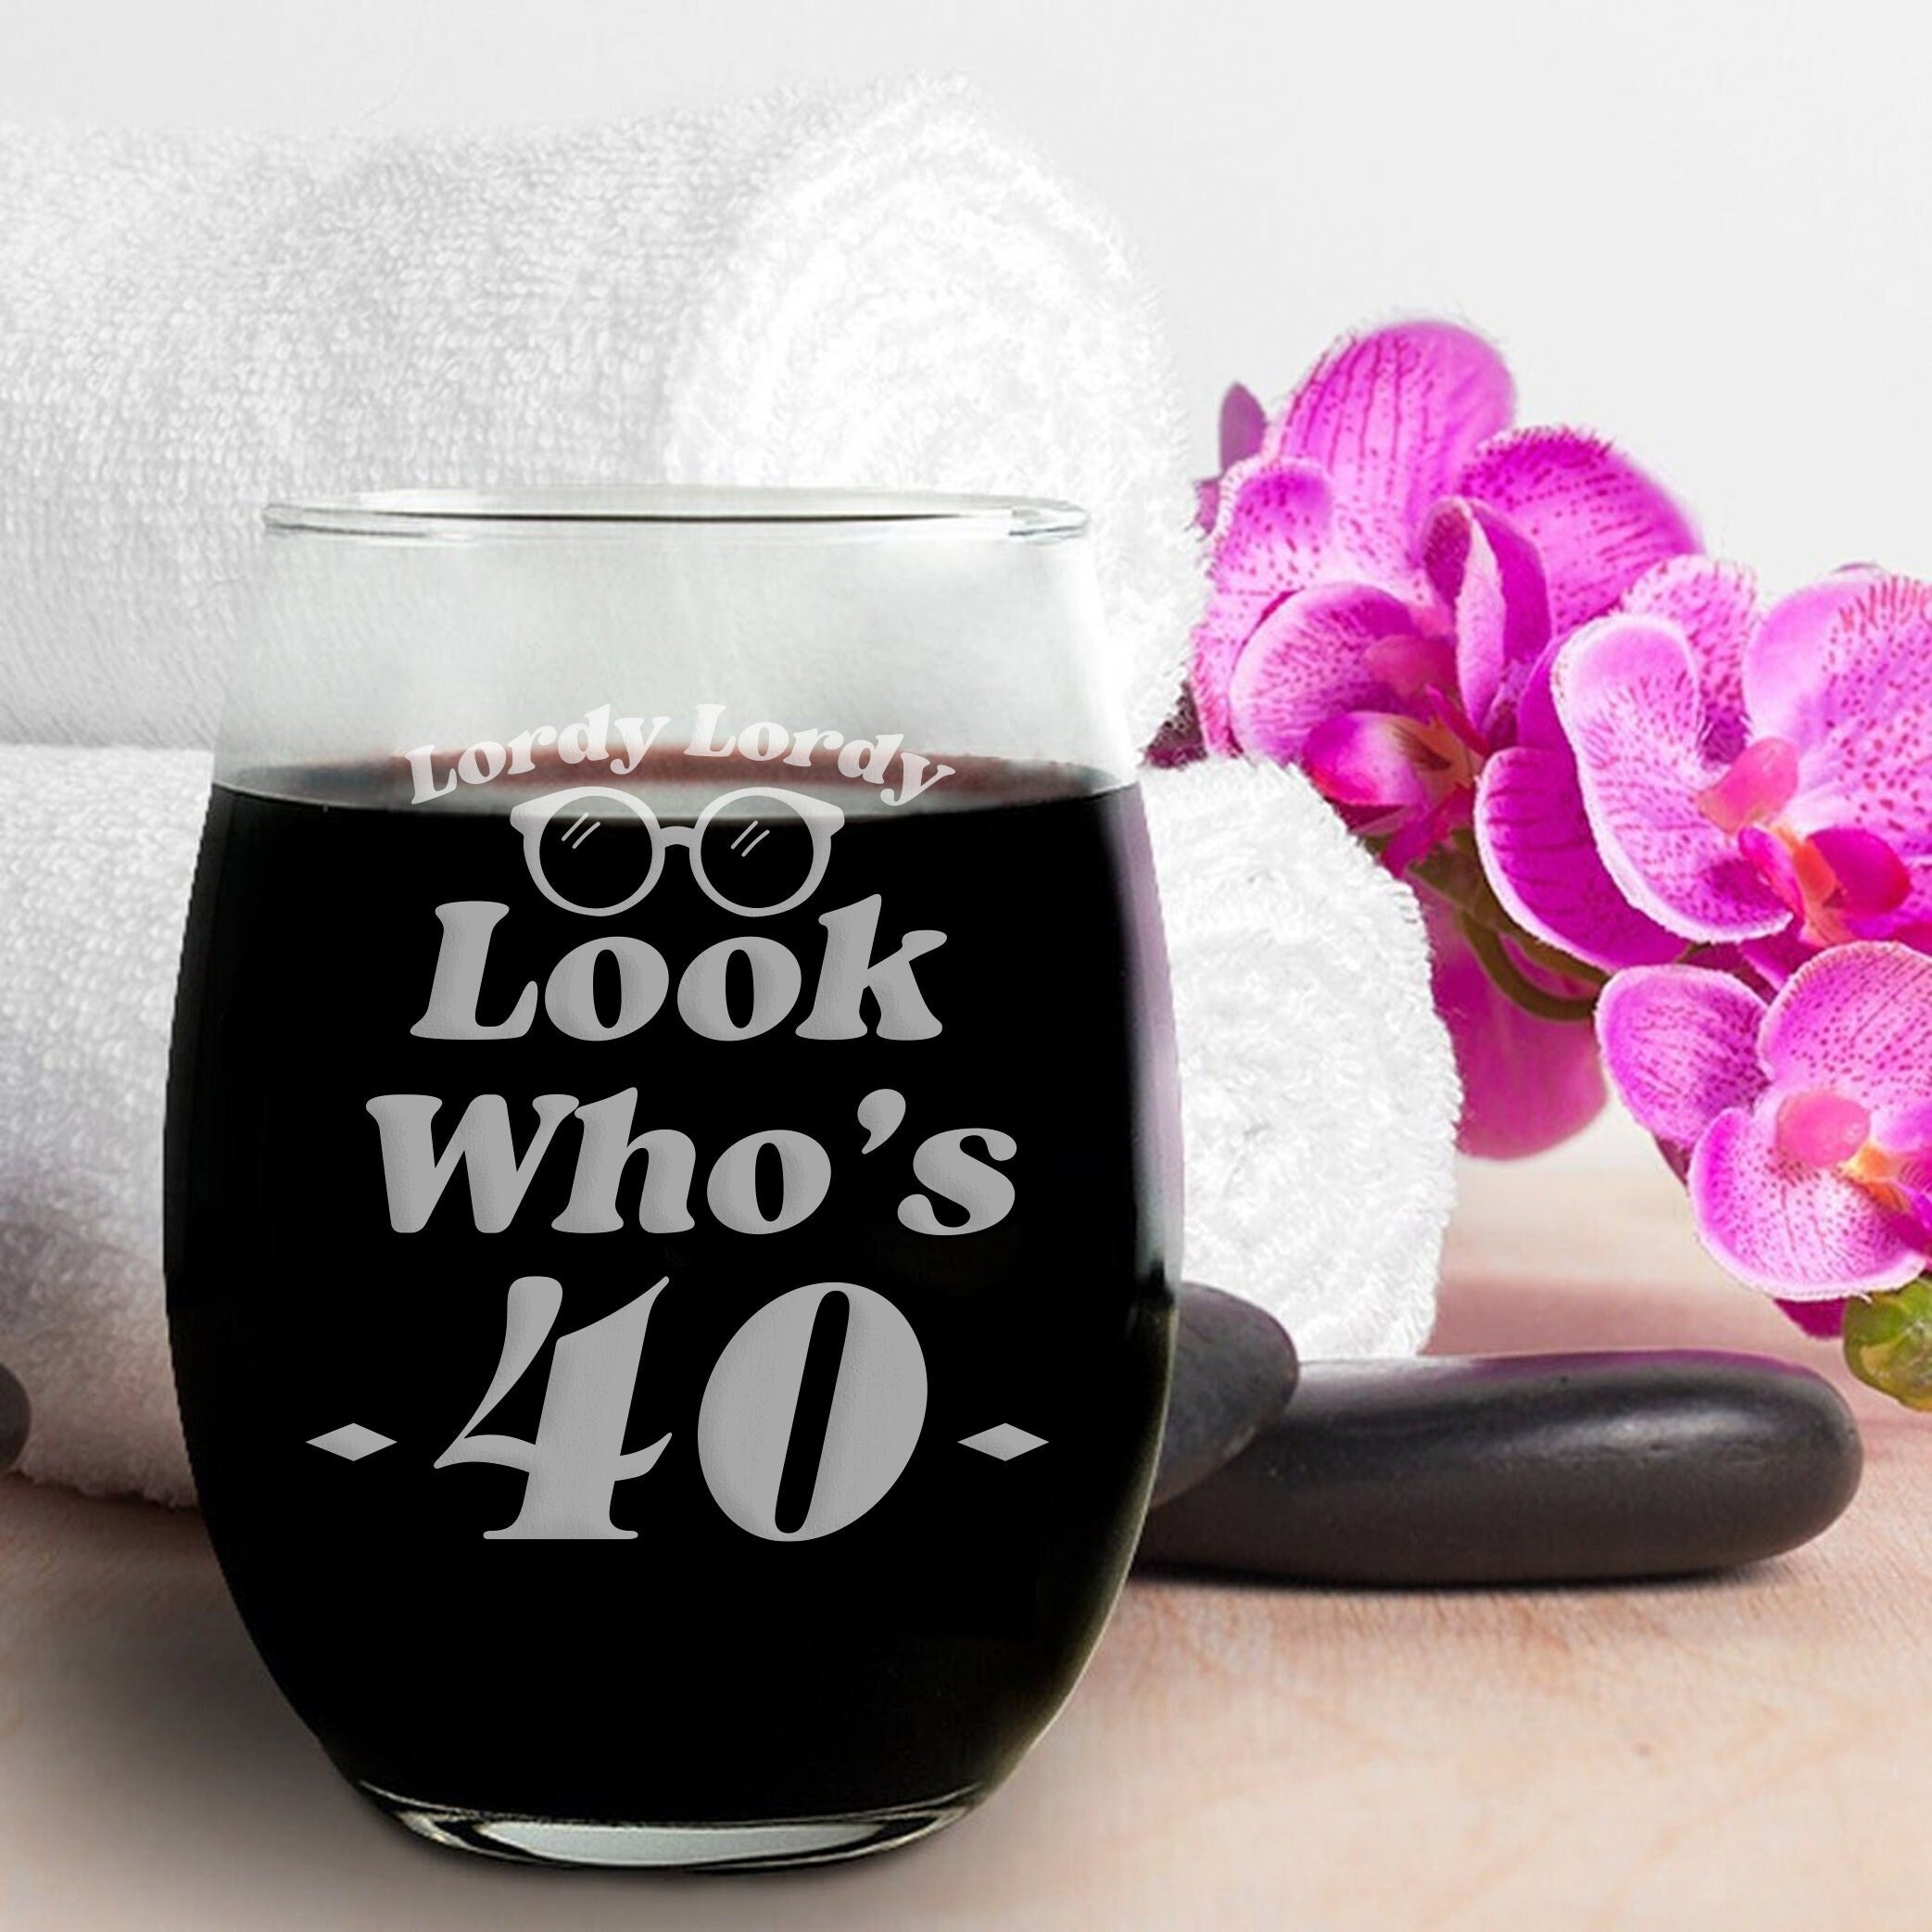 Details about   40th Birthday "Lordy Lordy Look Who's Forty" Wine Glass Wife Present Party Gift 